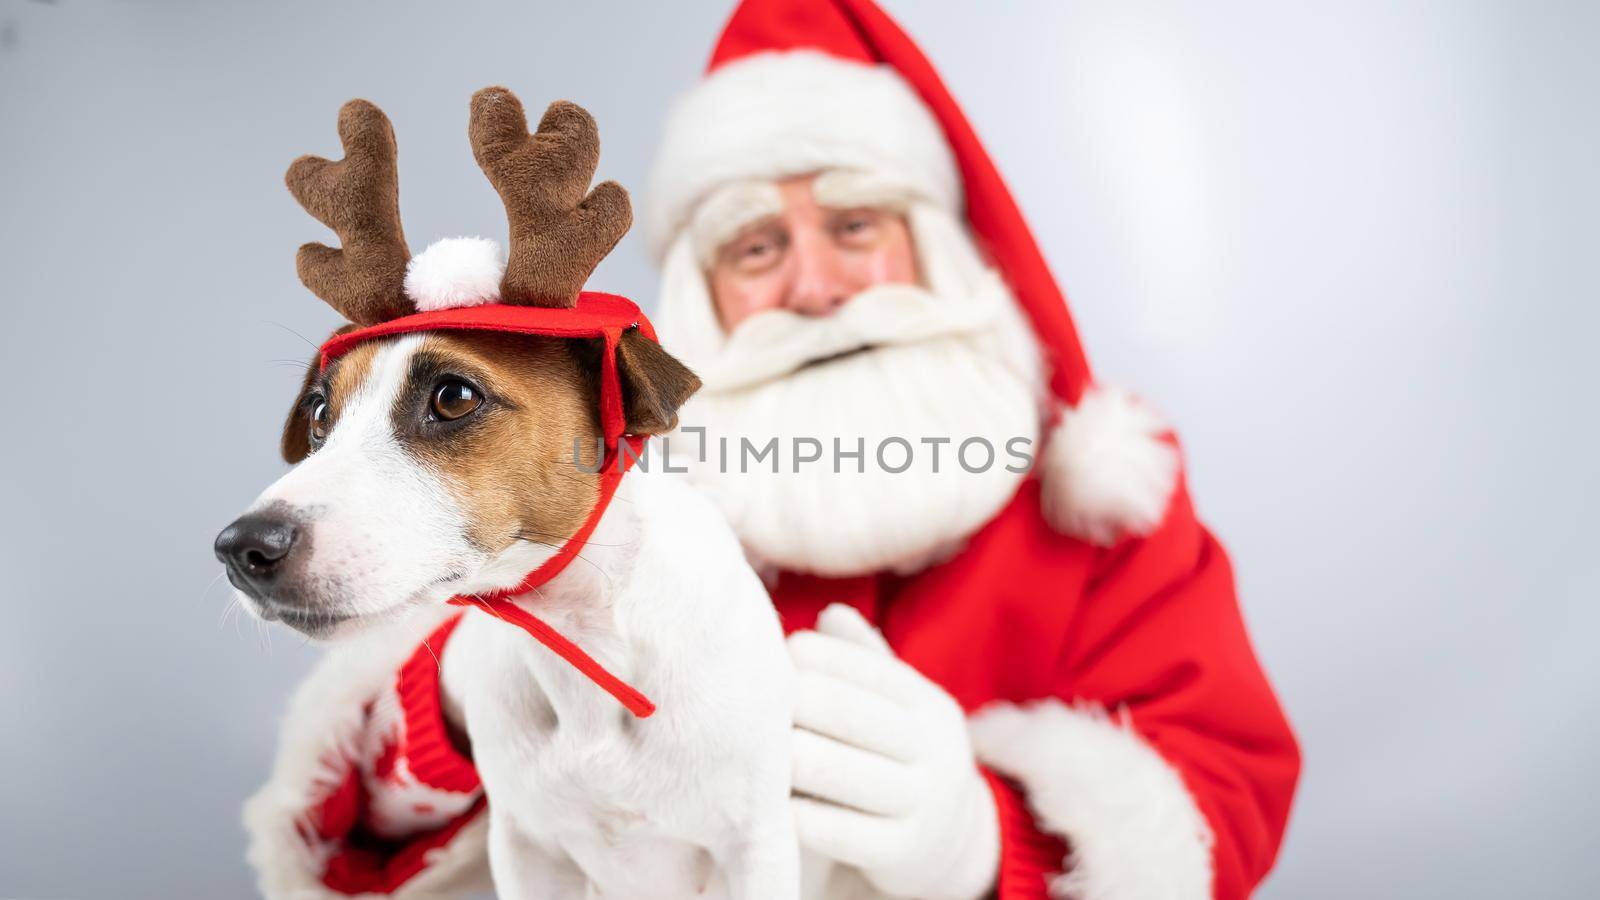 Santa claus and jack russell terrier dog dressed as a reindeer, santa's helper on a white background. by mrwed54